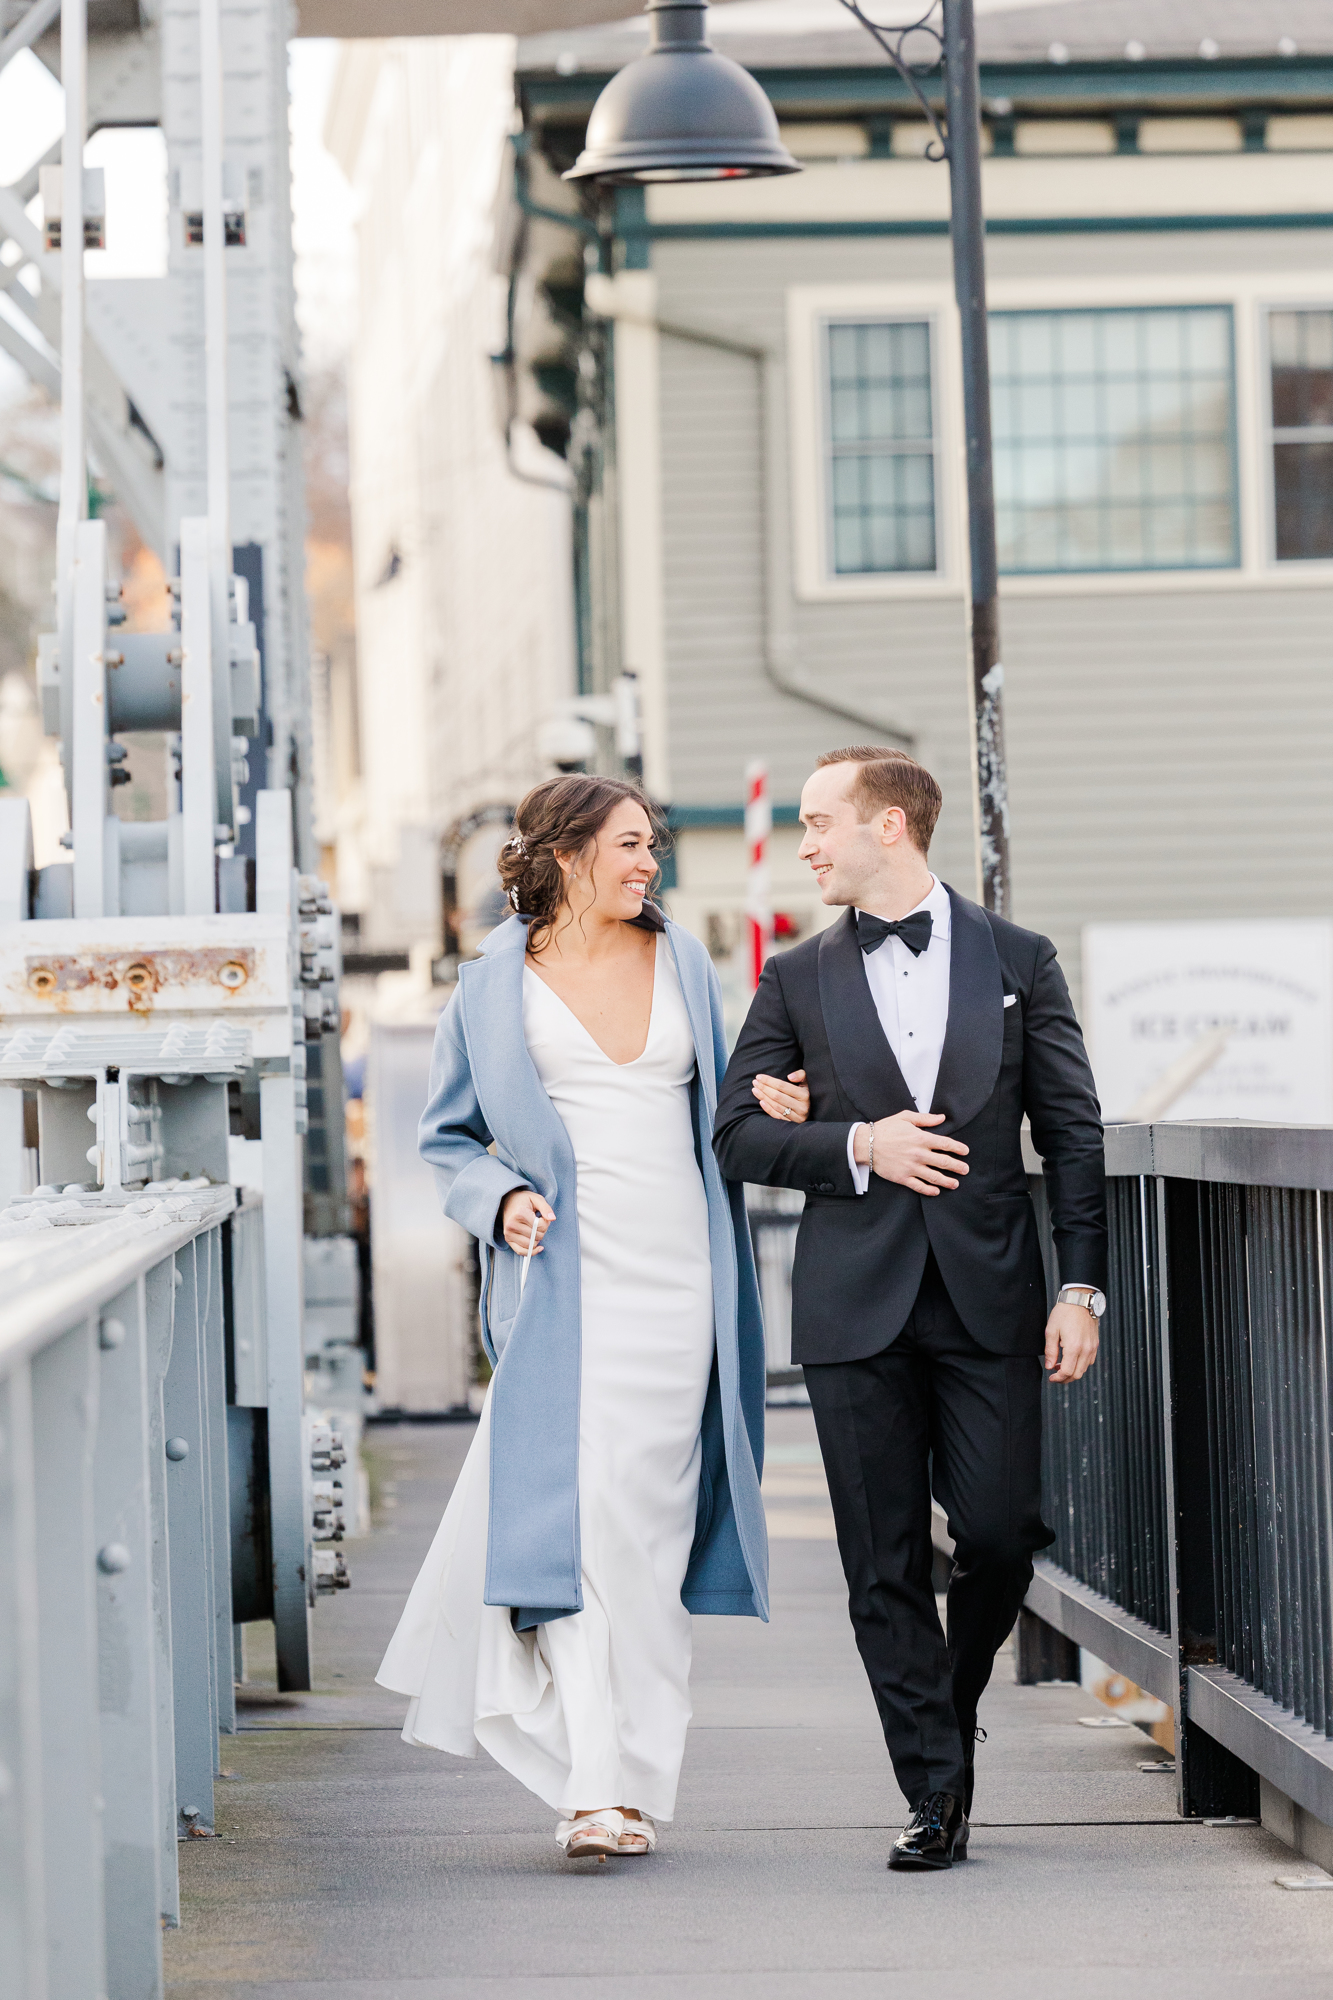 Fashionable Oceanside Mystic Wedding Photography at Branford House 